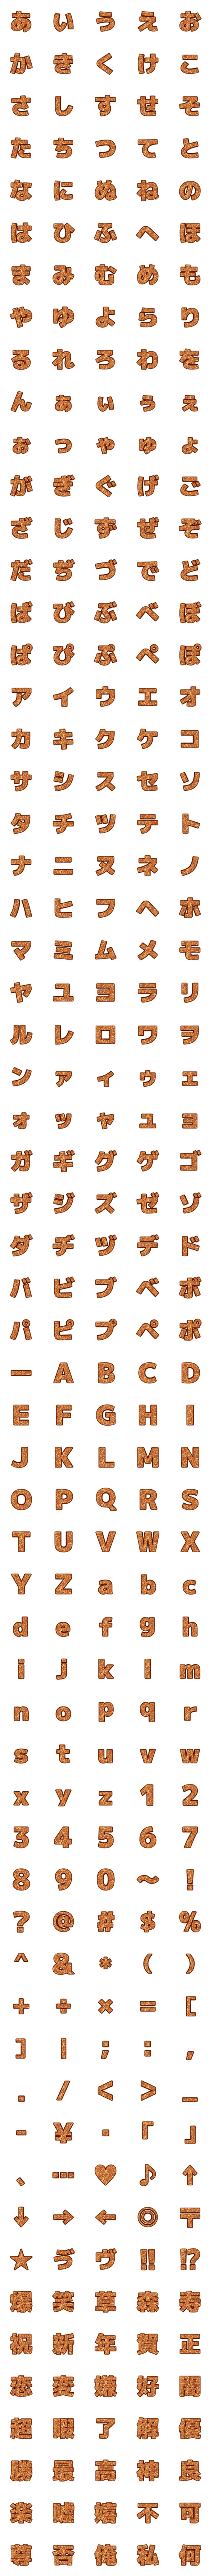 [LINE絵文字]コルク デコ文字 -ゴシック体-の画像一覧